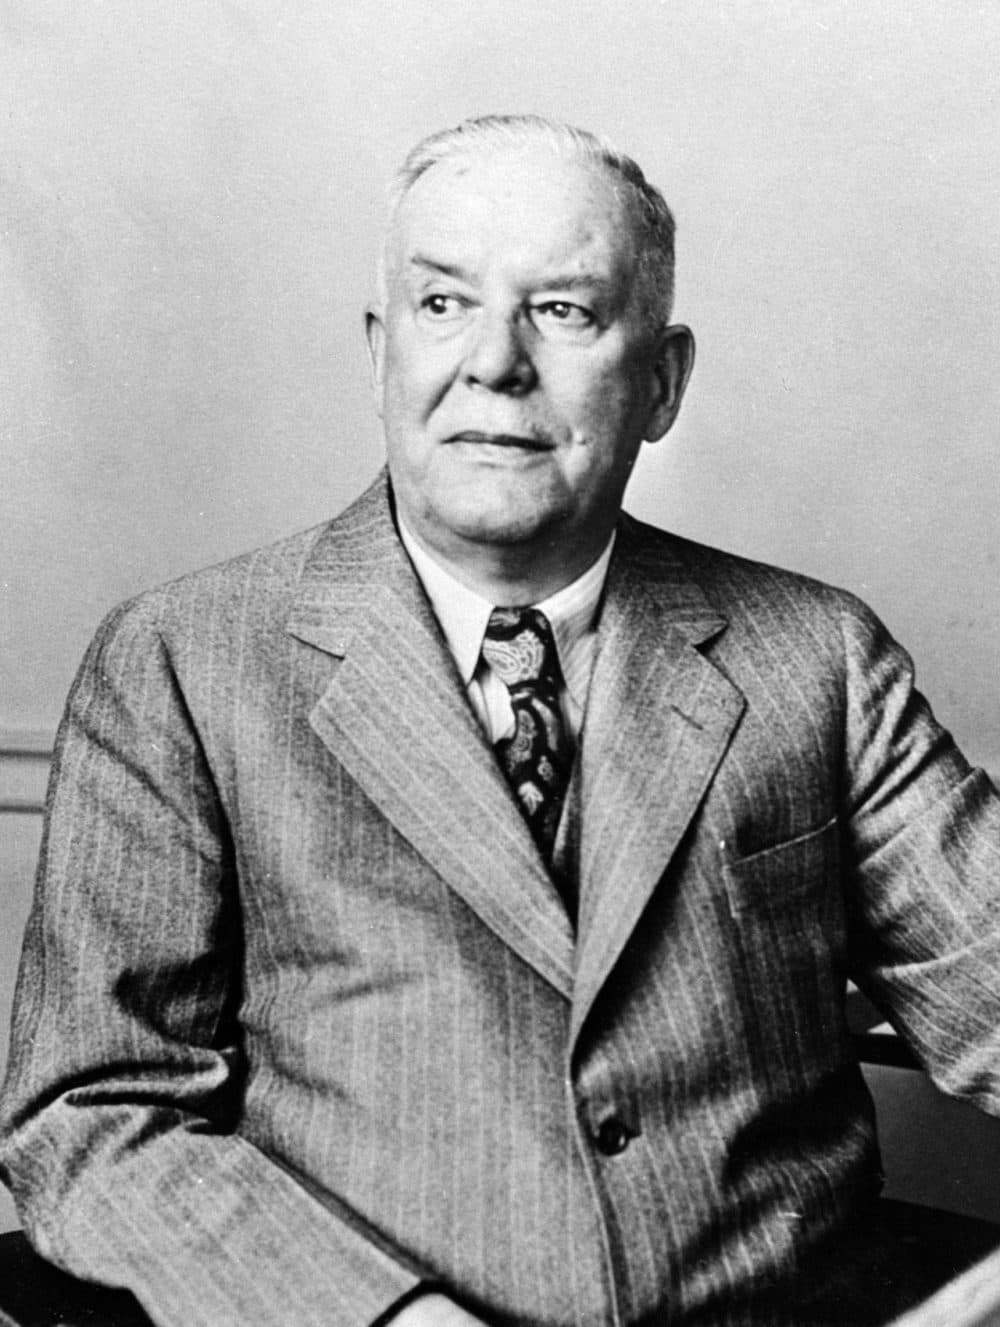 Poetry and National book award winner, Wallace Stevens. March 1951. (AP Photo)